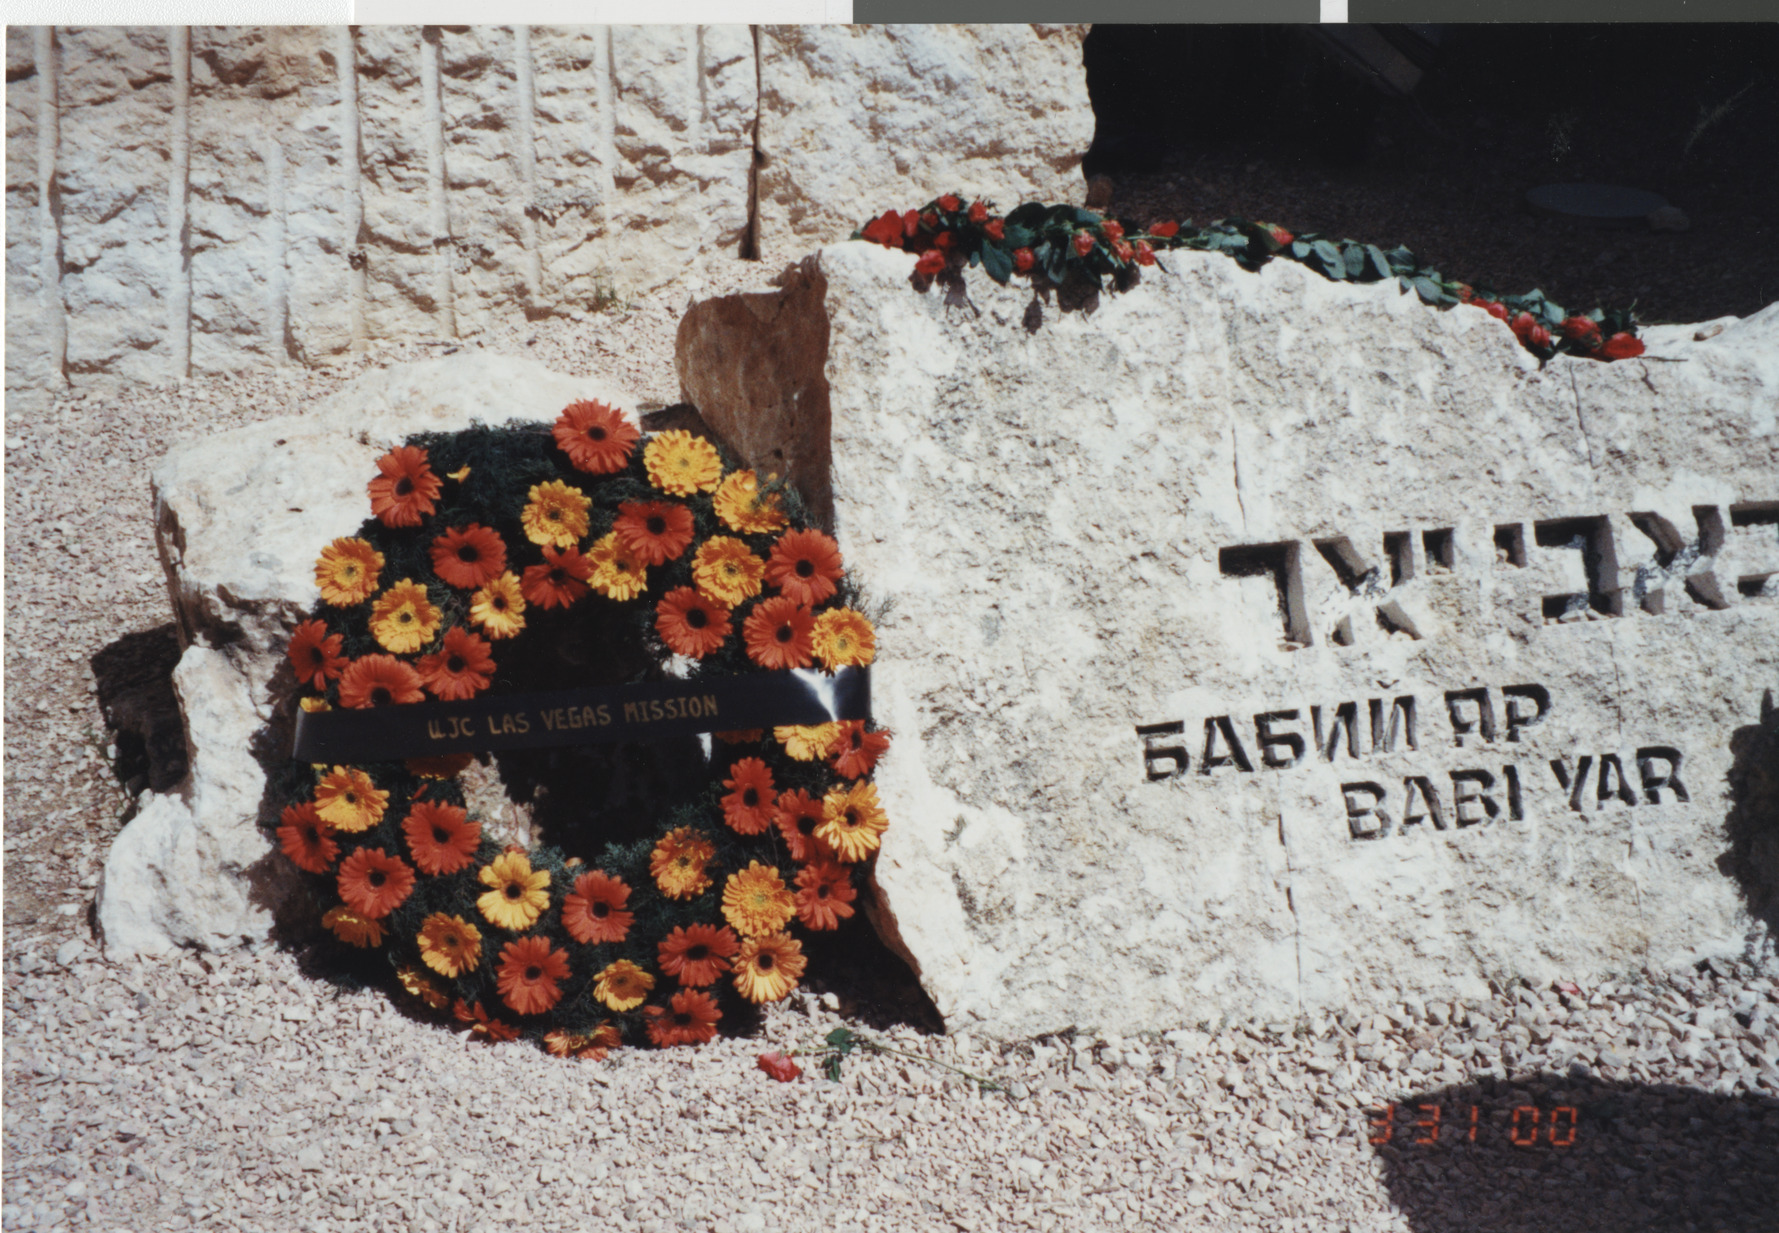 Photograph of memorial wreath labeled UJC Las Vegas Mission, March 31, 2000